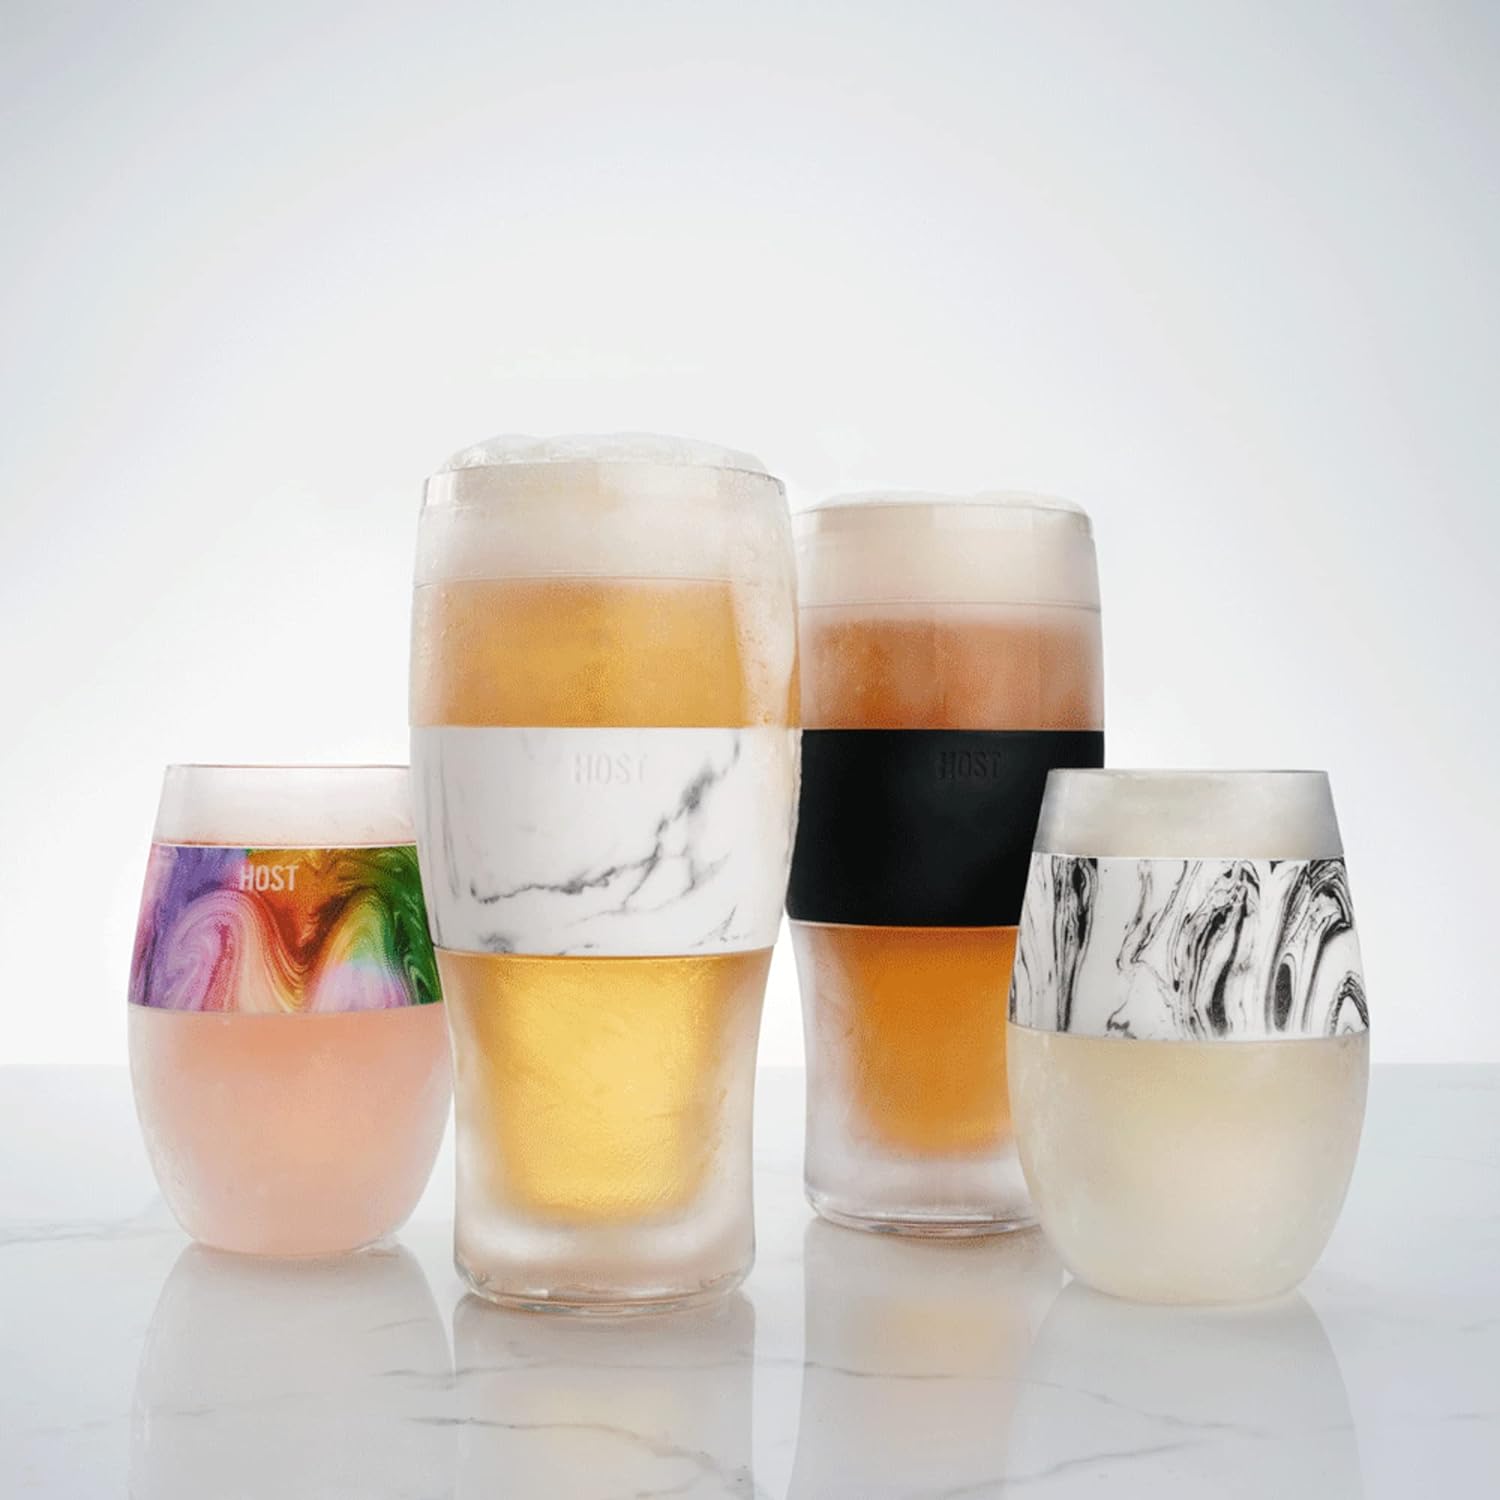 Host FREEZE Beer Glasses Review